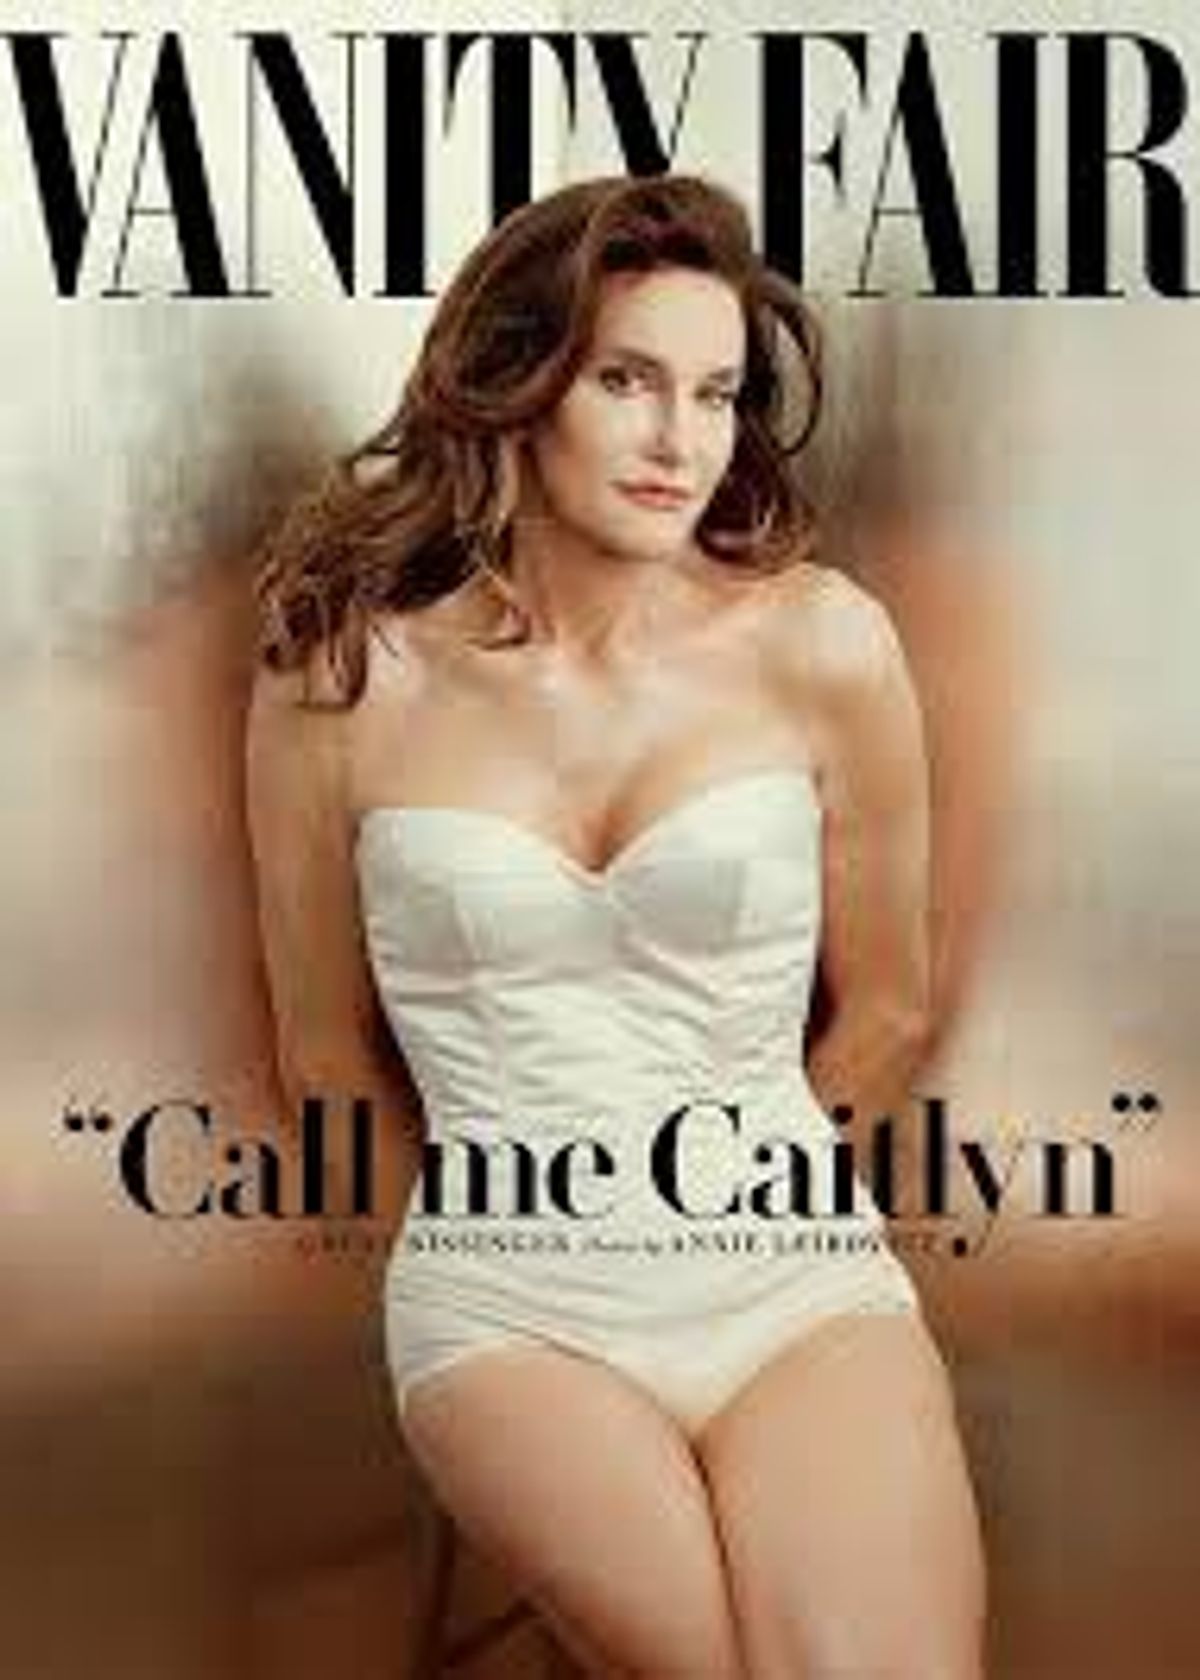 An Open Letter To Those Who Call Caitlyn Jenner "He/She"